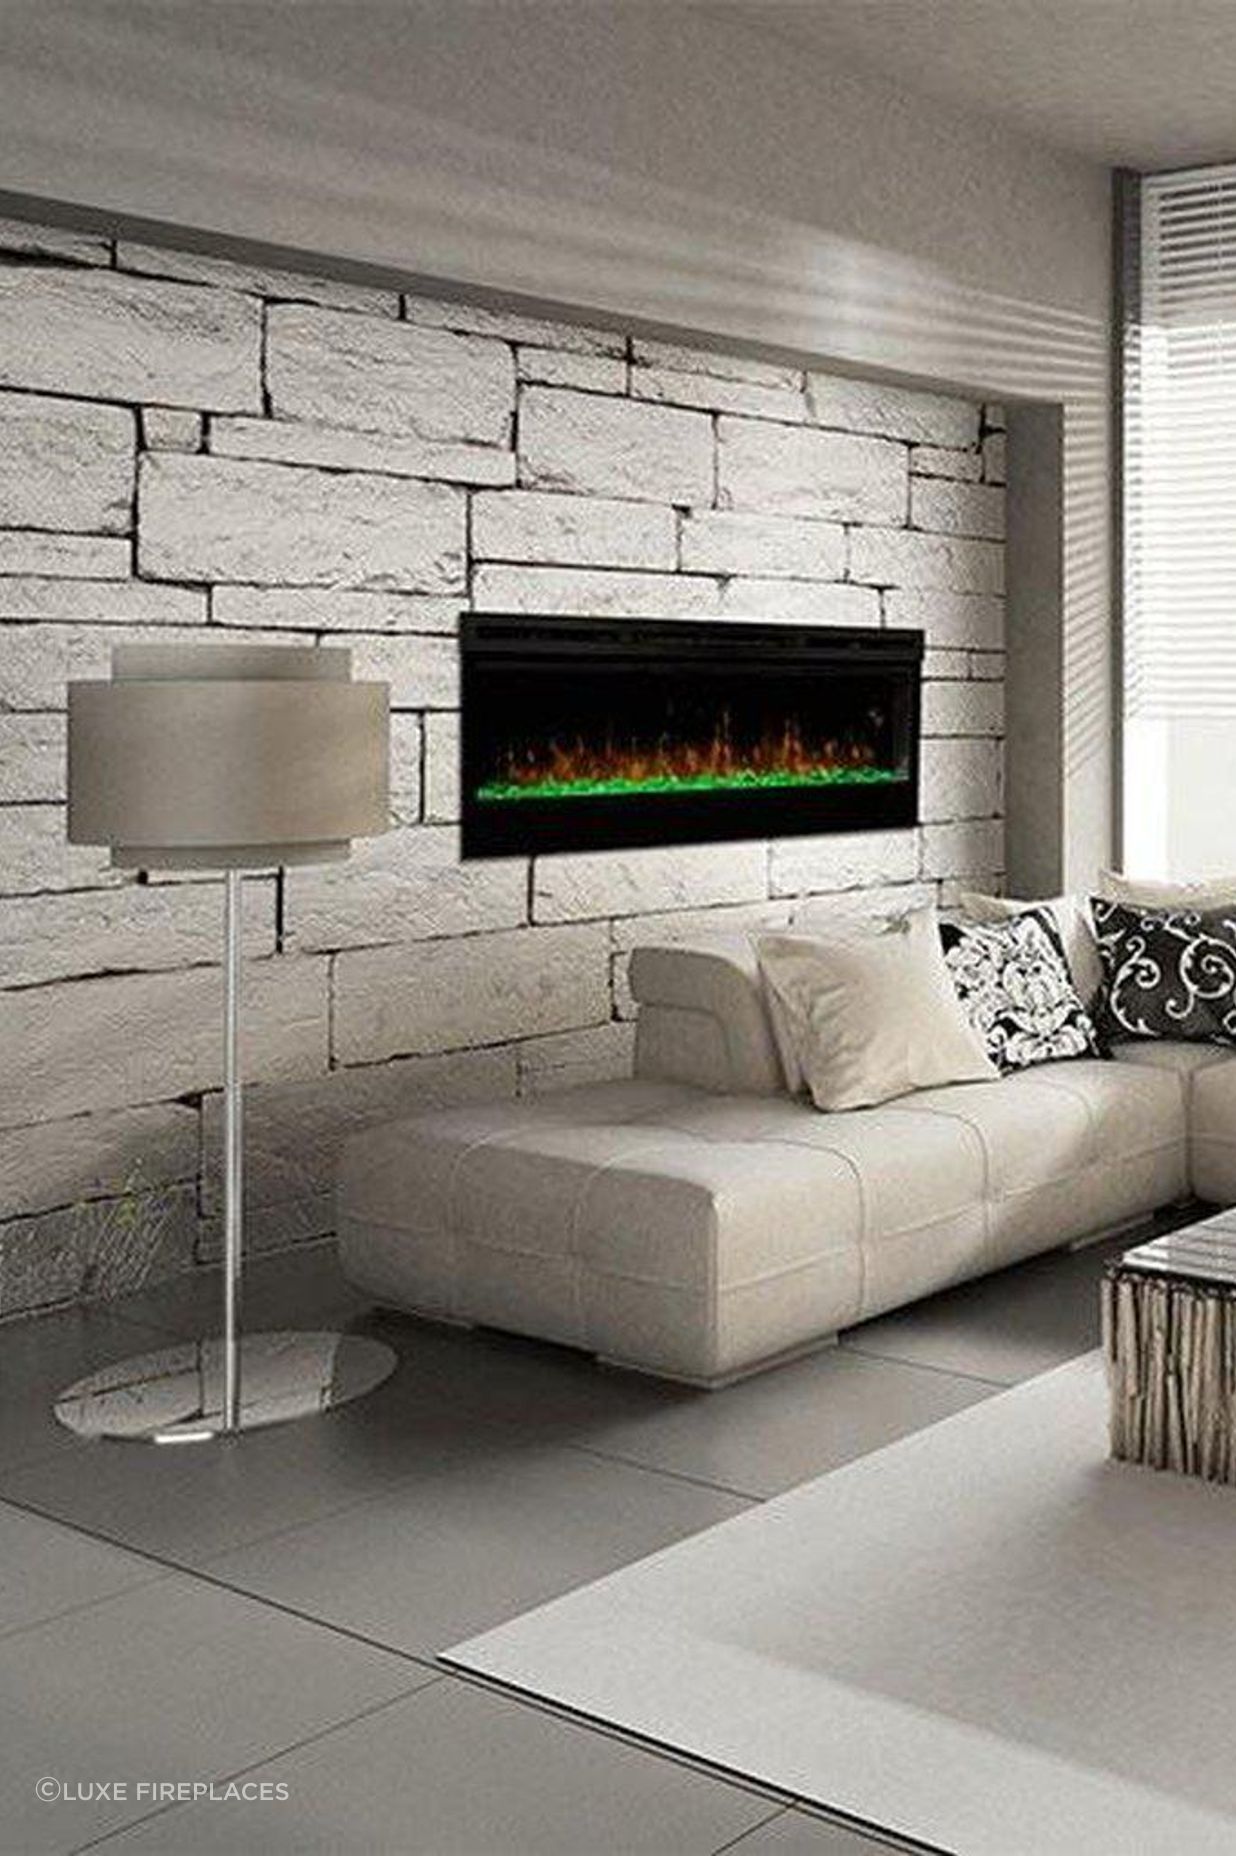 Long-lasting LED lights ensure the Prism Electric Fireplace remains a beacon of warmth and style for years.